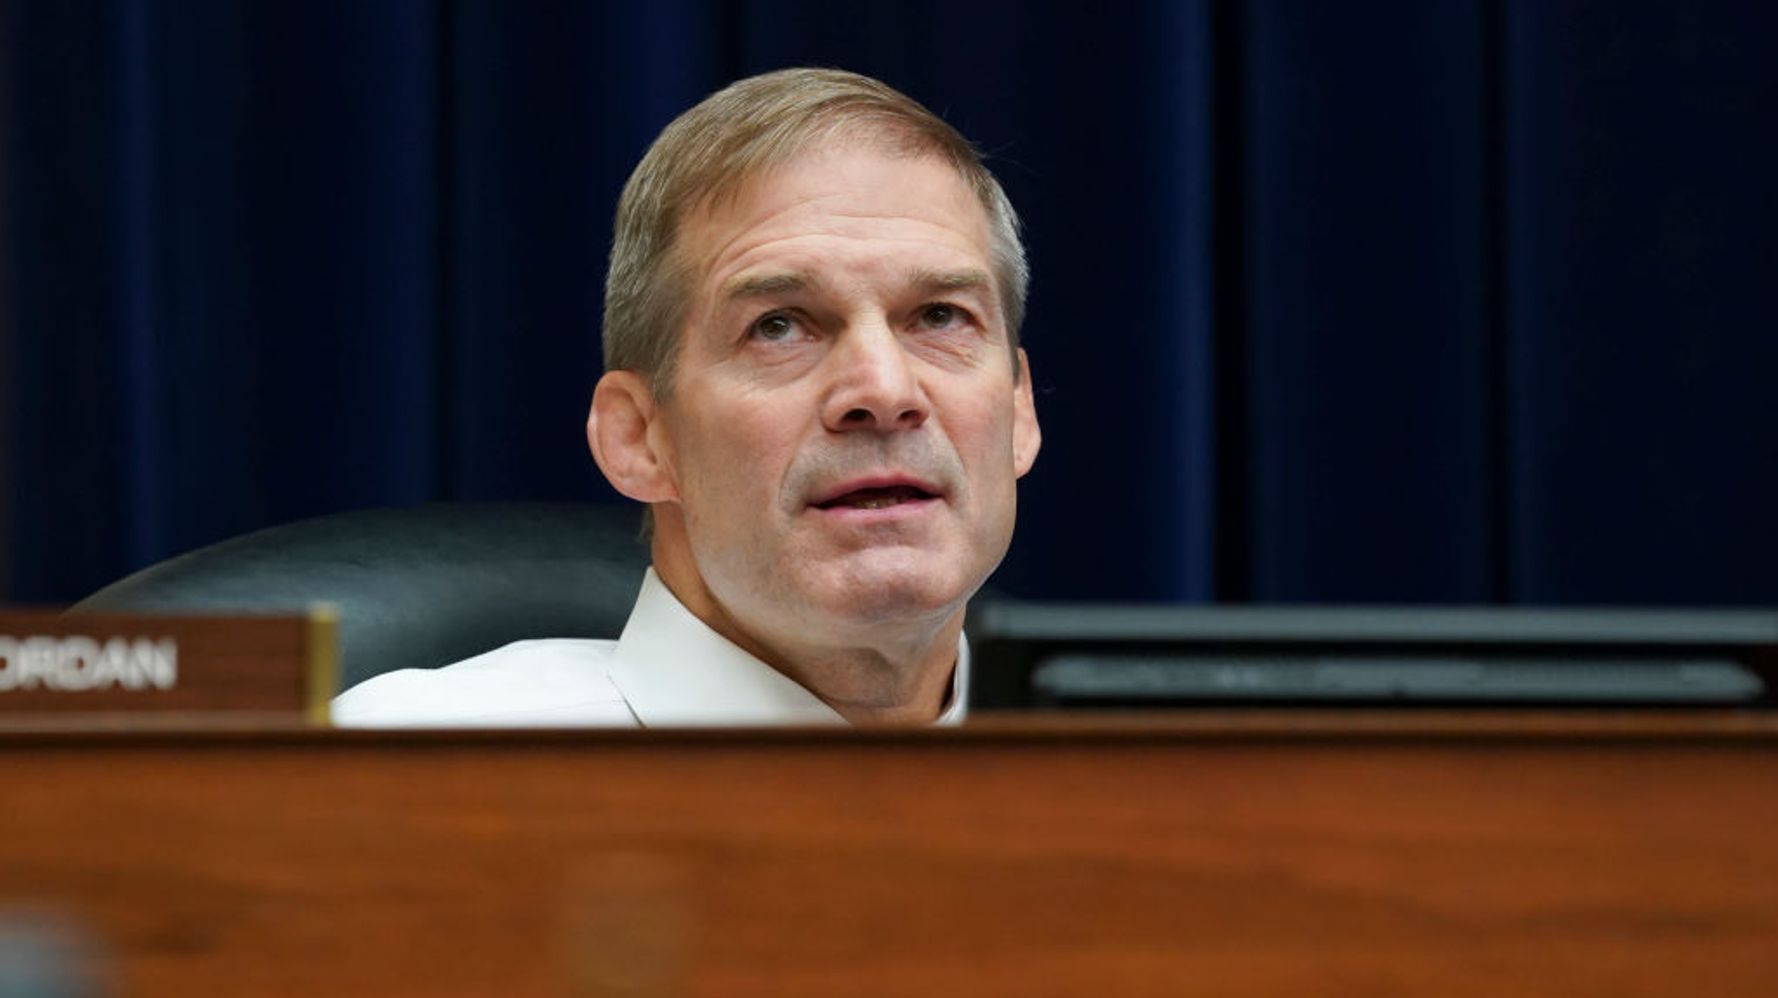 George Clooney to produce documentaries on sexual abuse of athletes where Jim Jordan trained